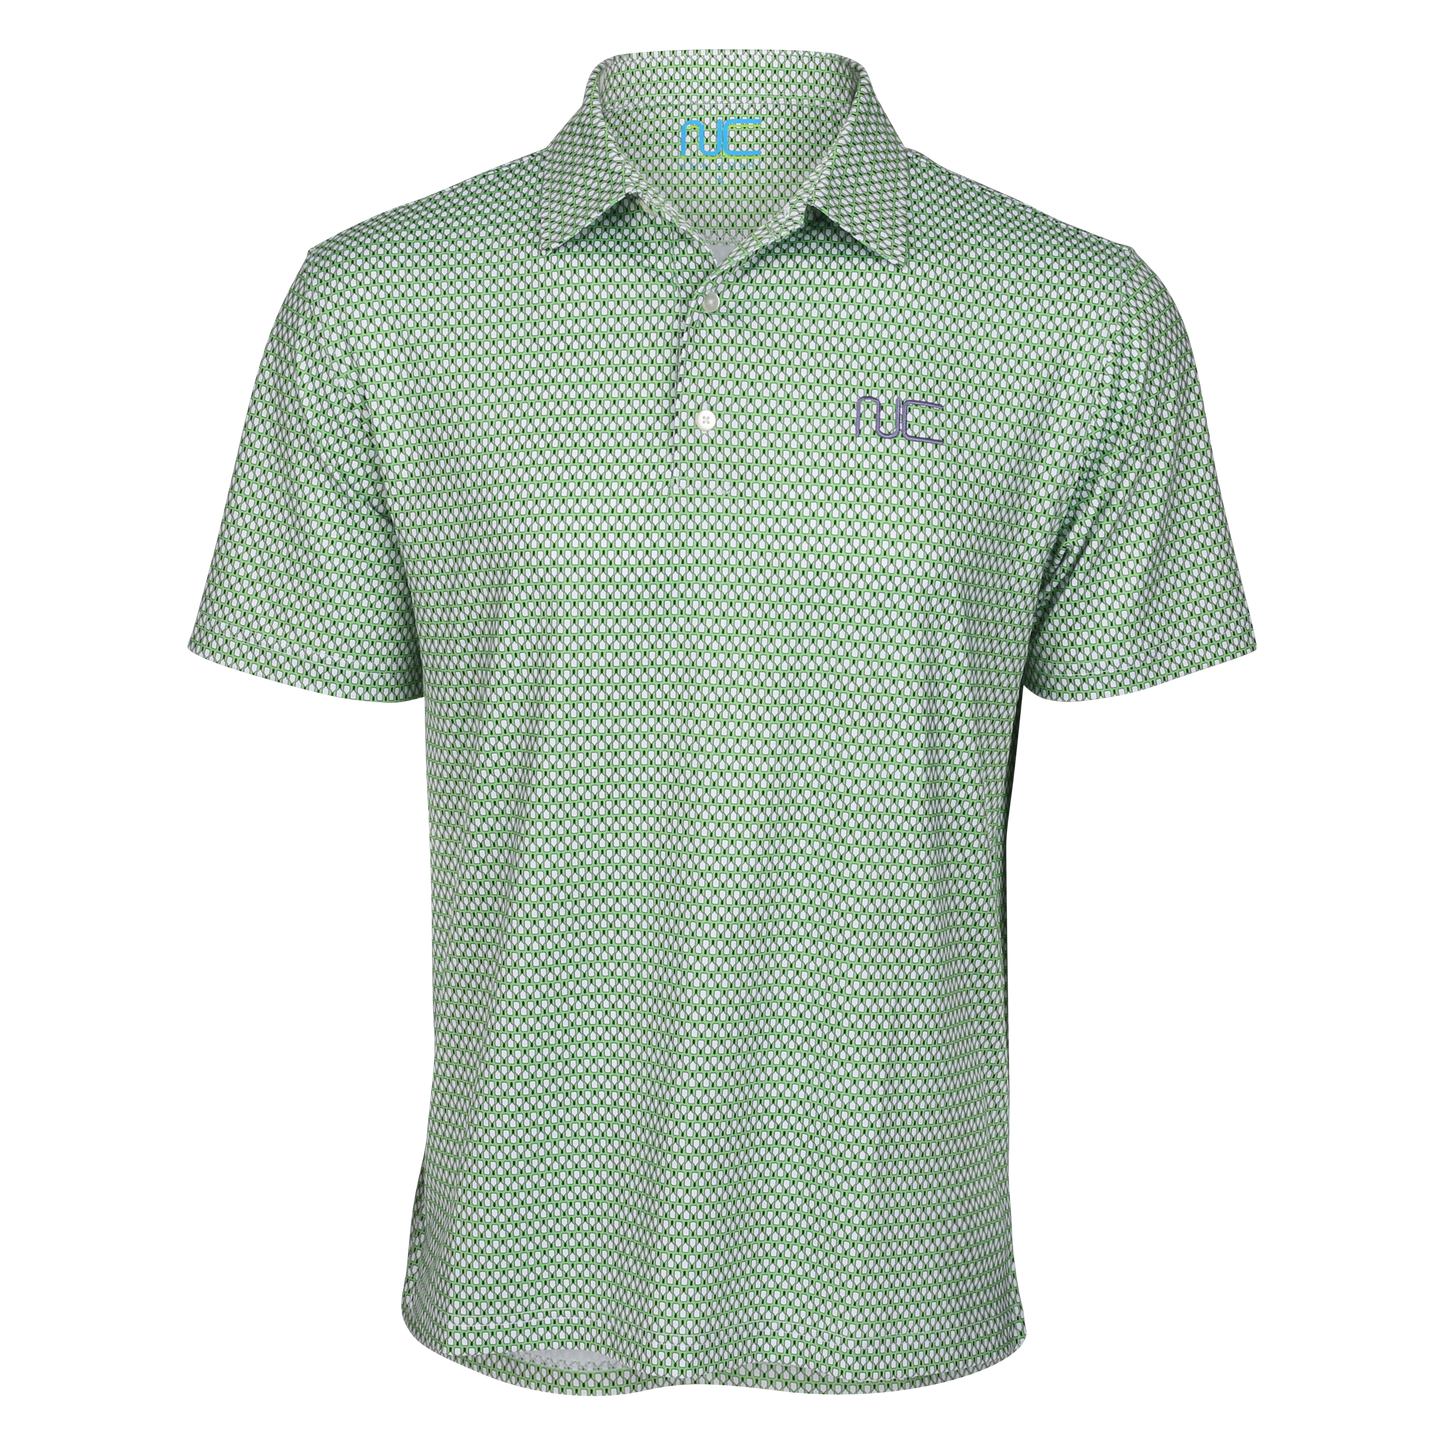 Men's Signature Pickleball Paddle Pattern Polo in Green